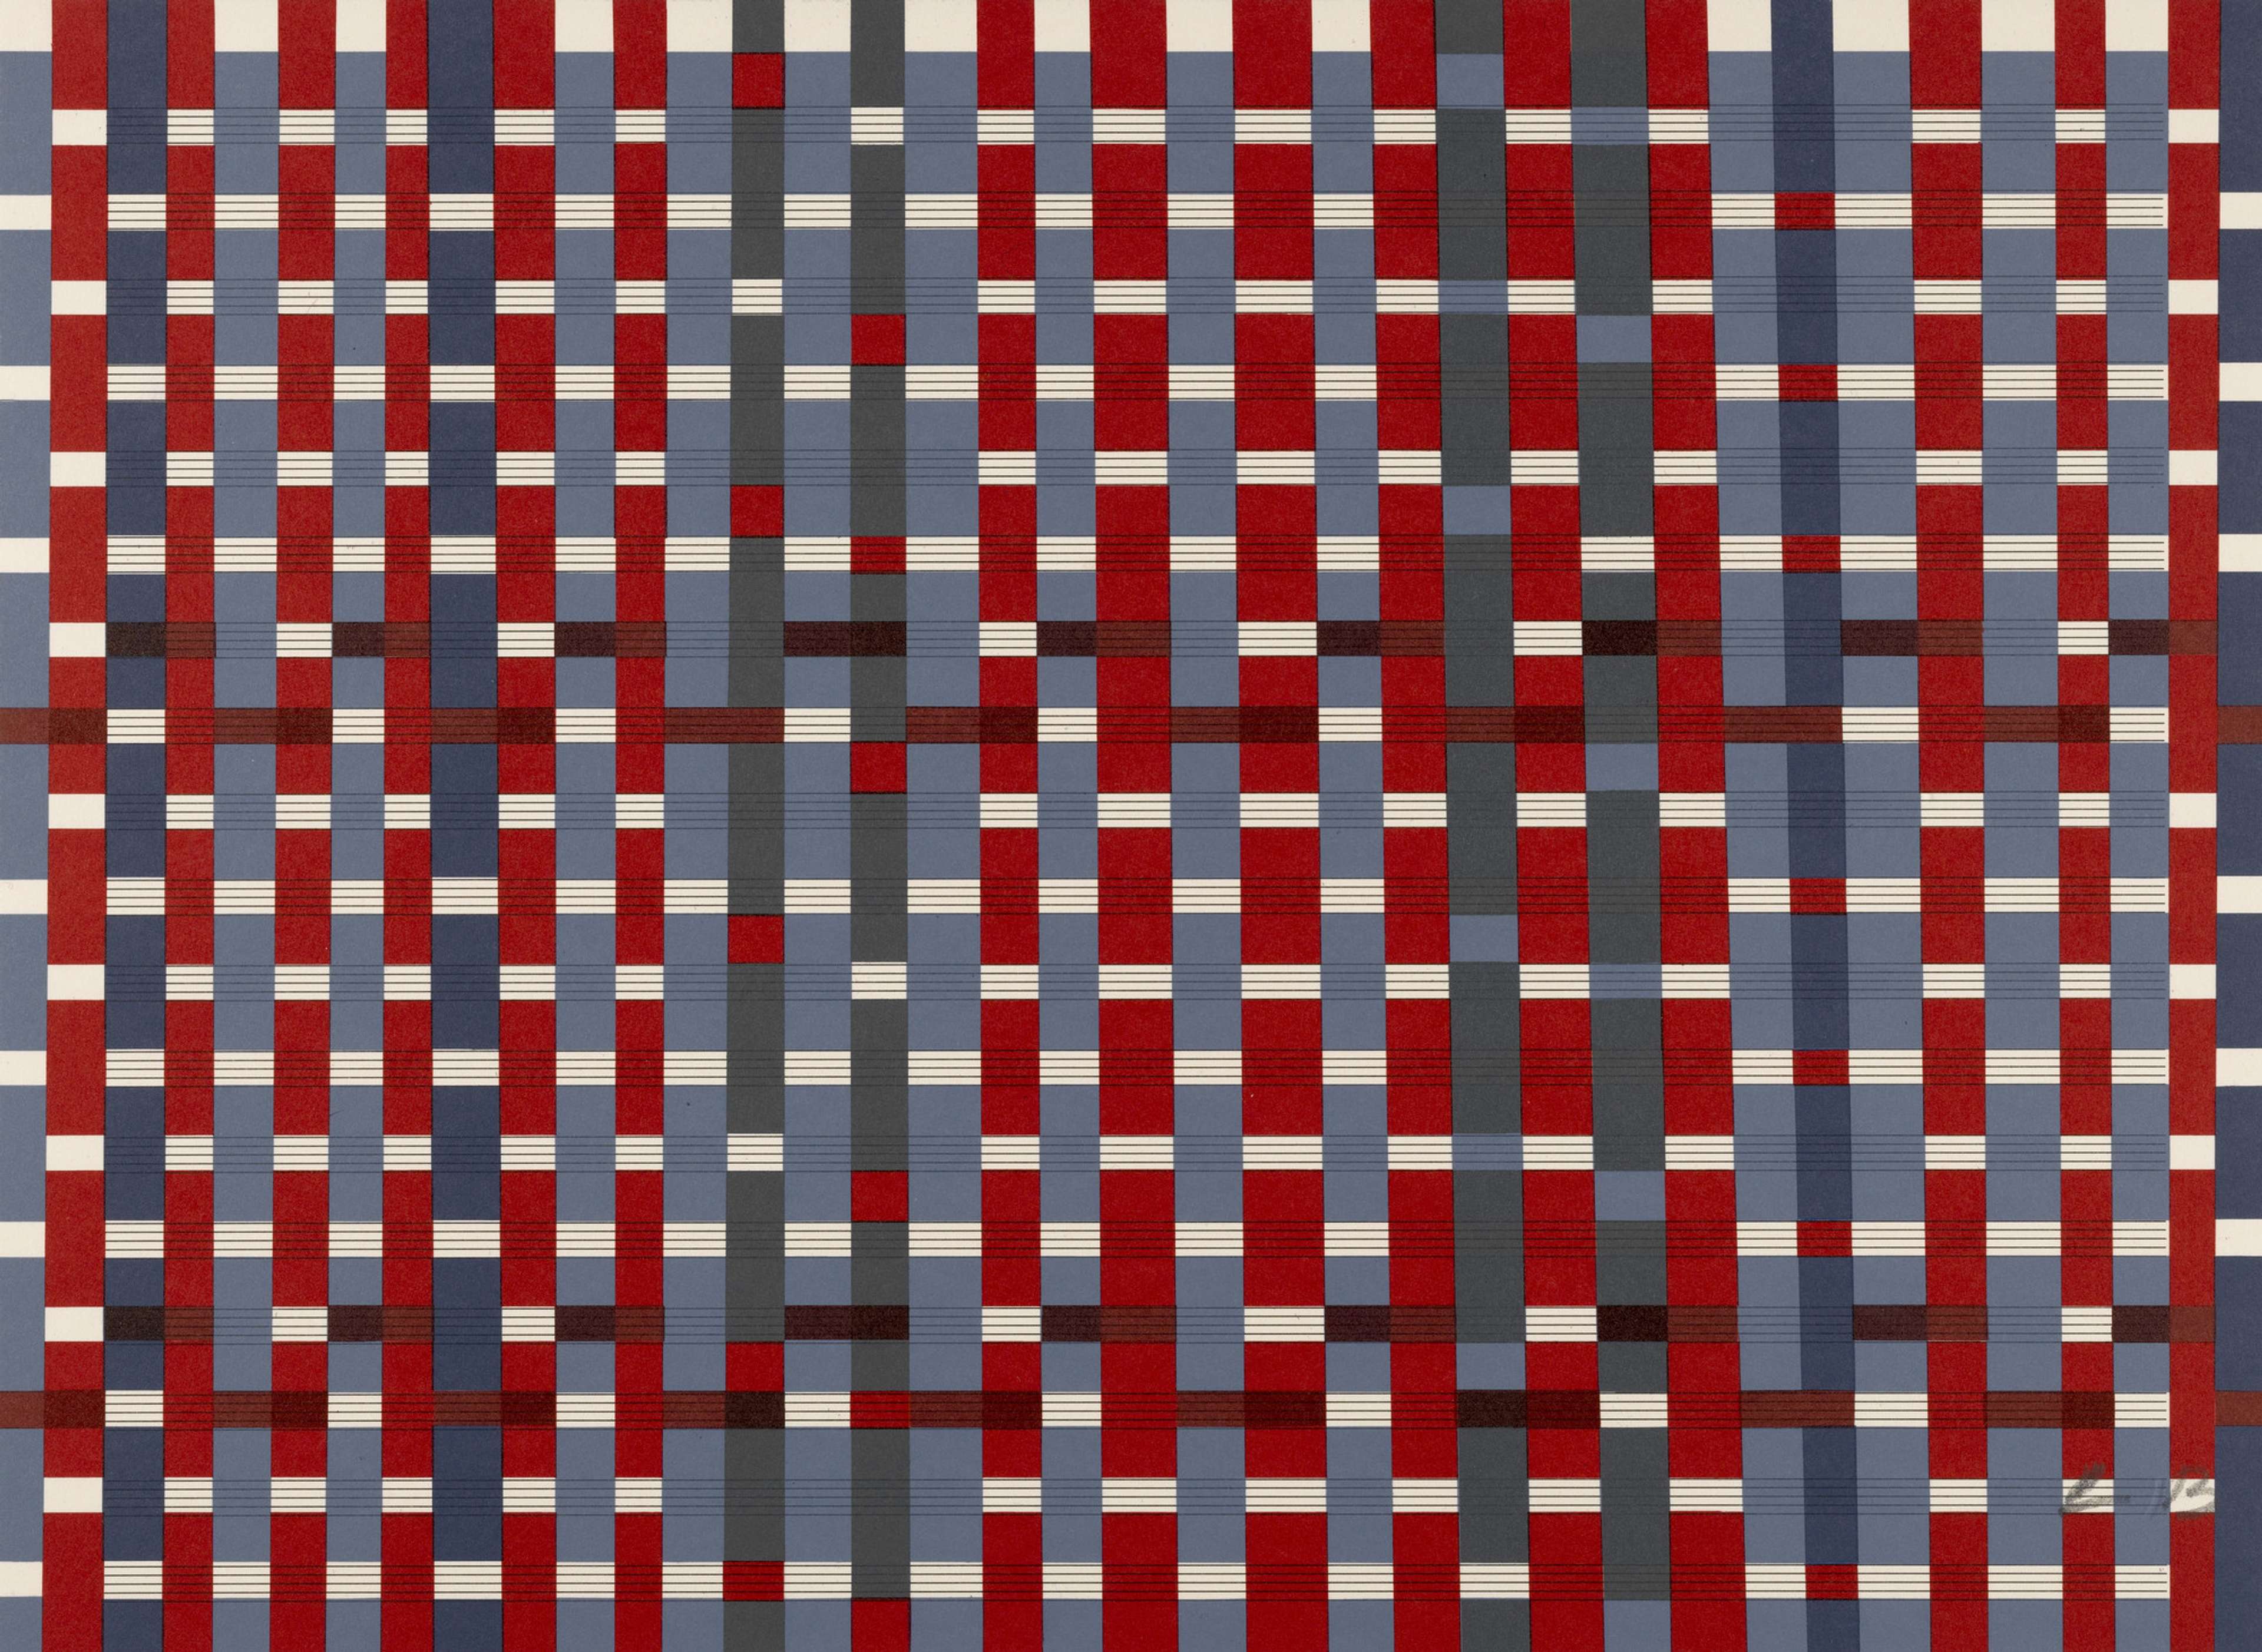 Louise Bourgeois’ Untitled #19. A screenprint of red, blue, and grey tones against a pattern of horizontal lines.